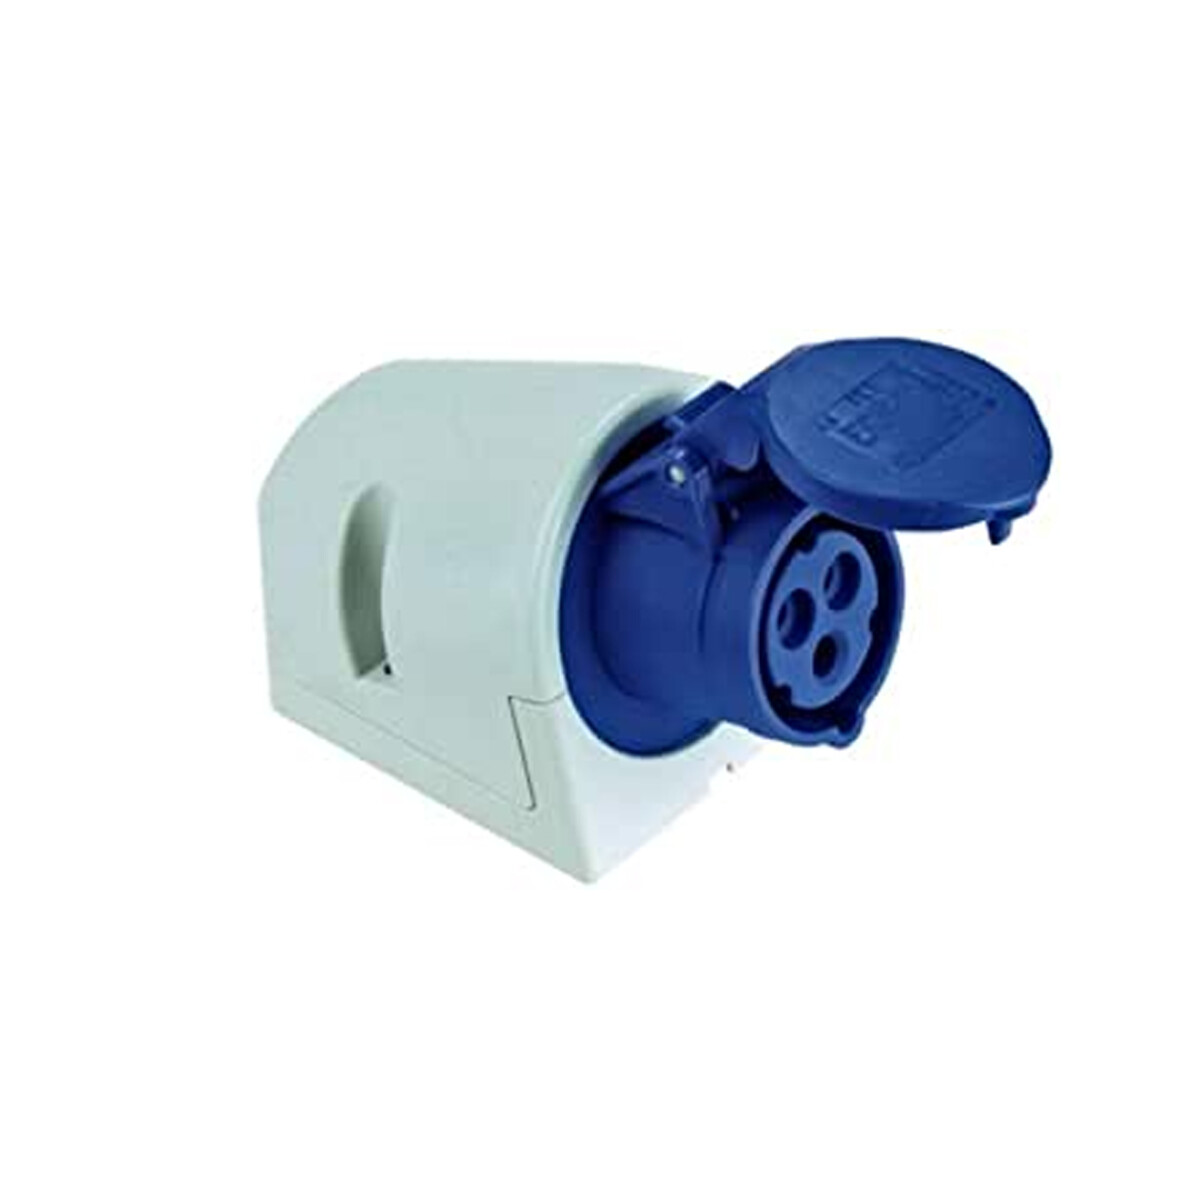 PCE Toma Pared - IP-44 220/240V H6 azul 16A 2P+T 